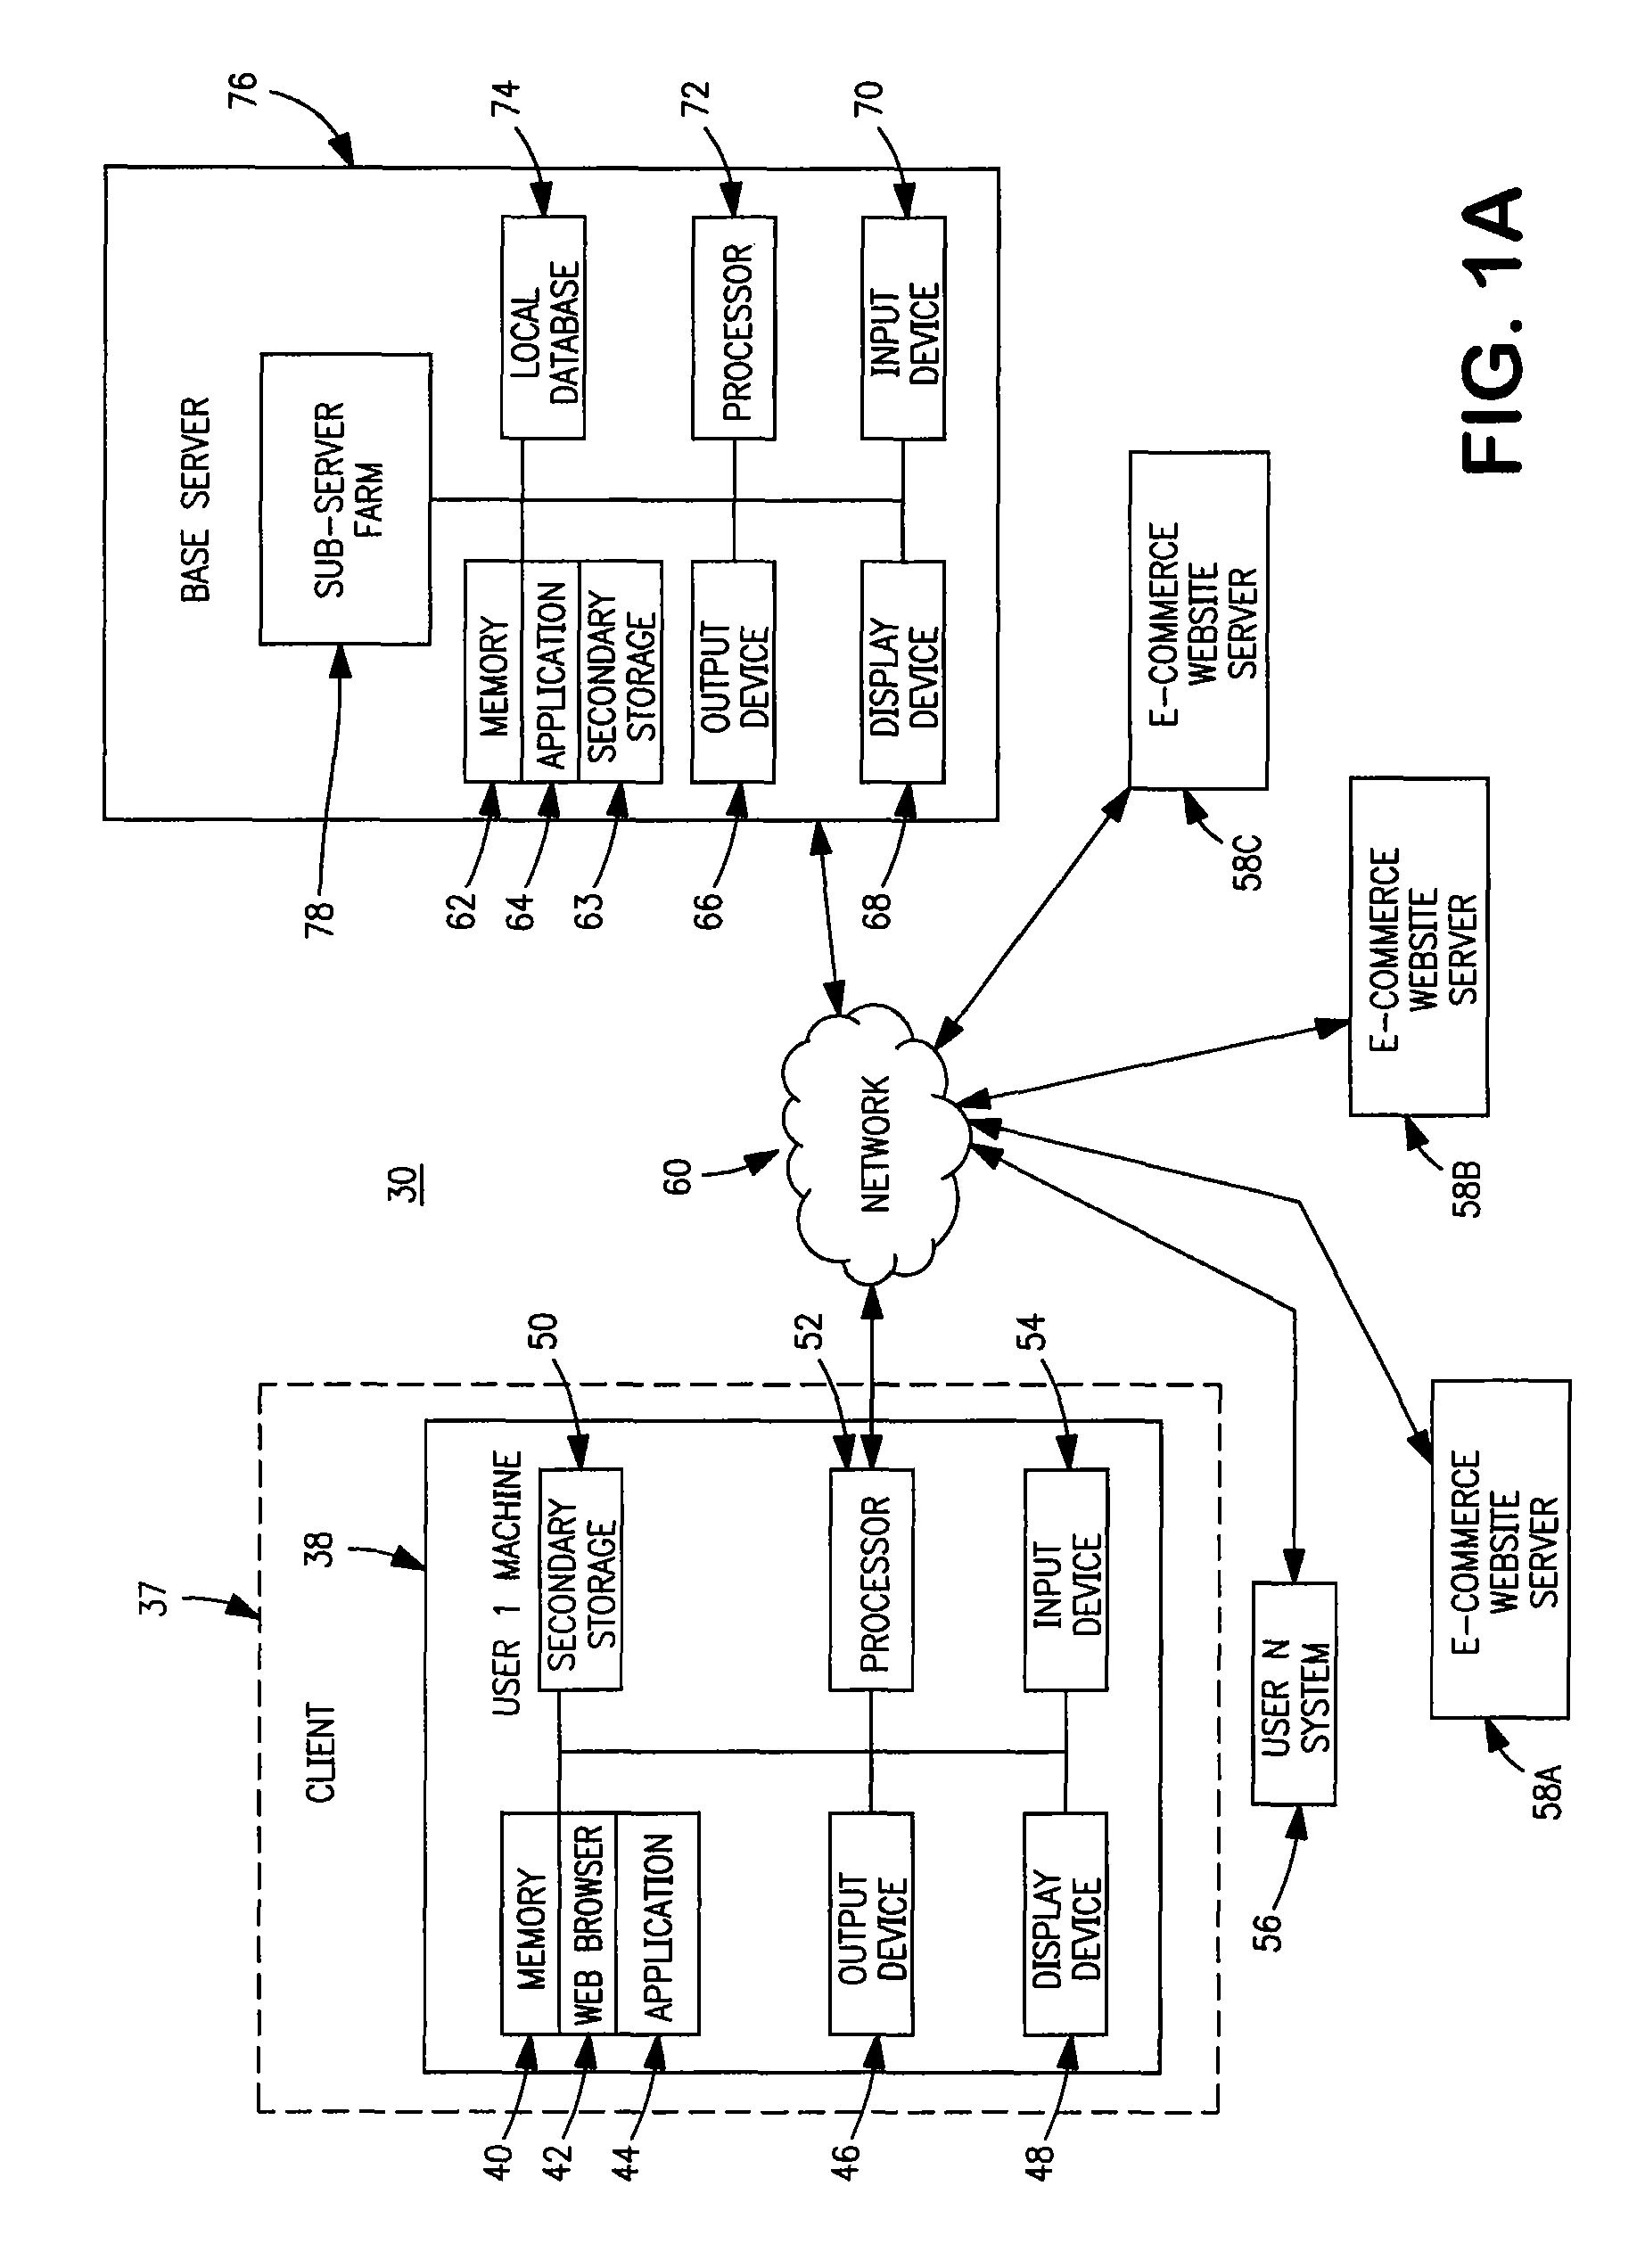 System, method and apparatus for interactive and comparative shopping